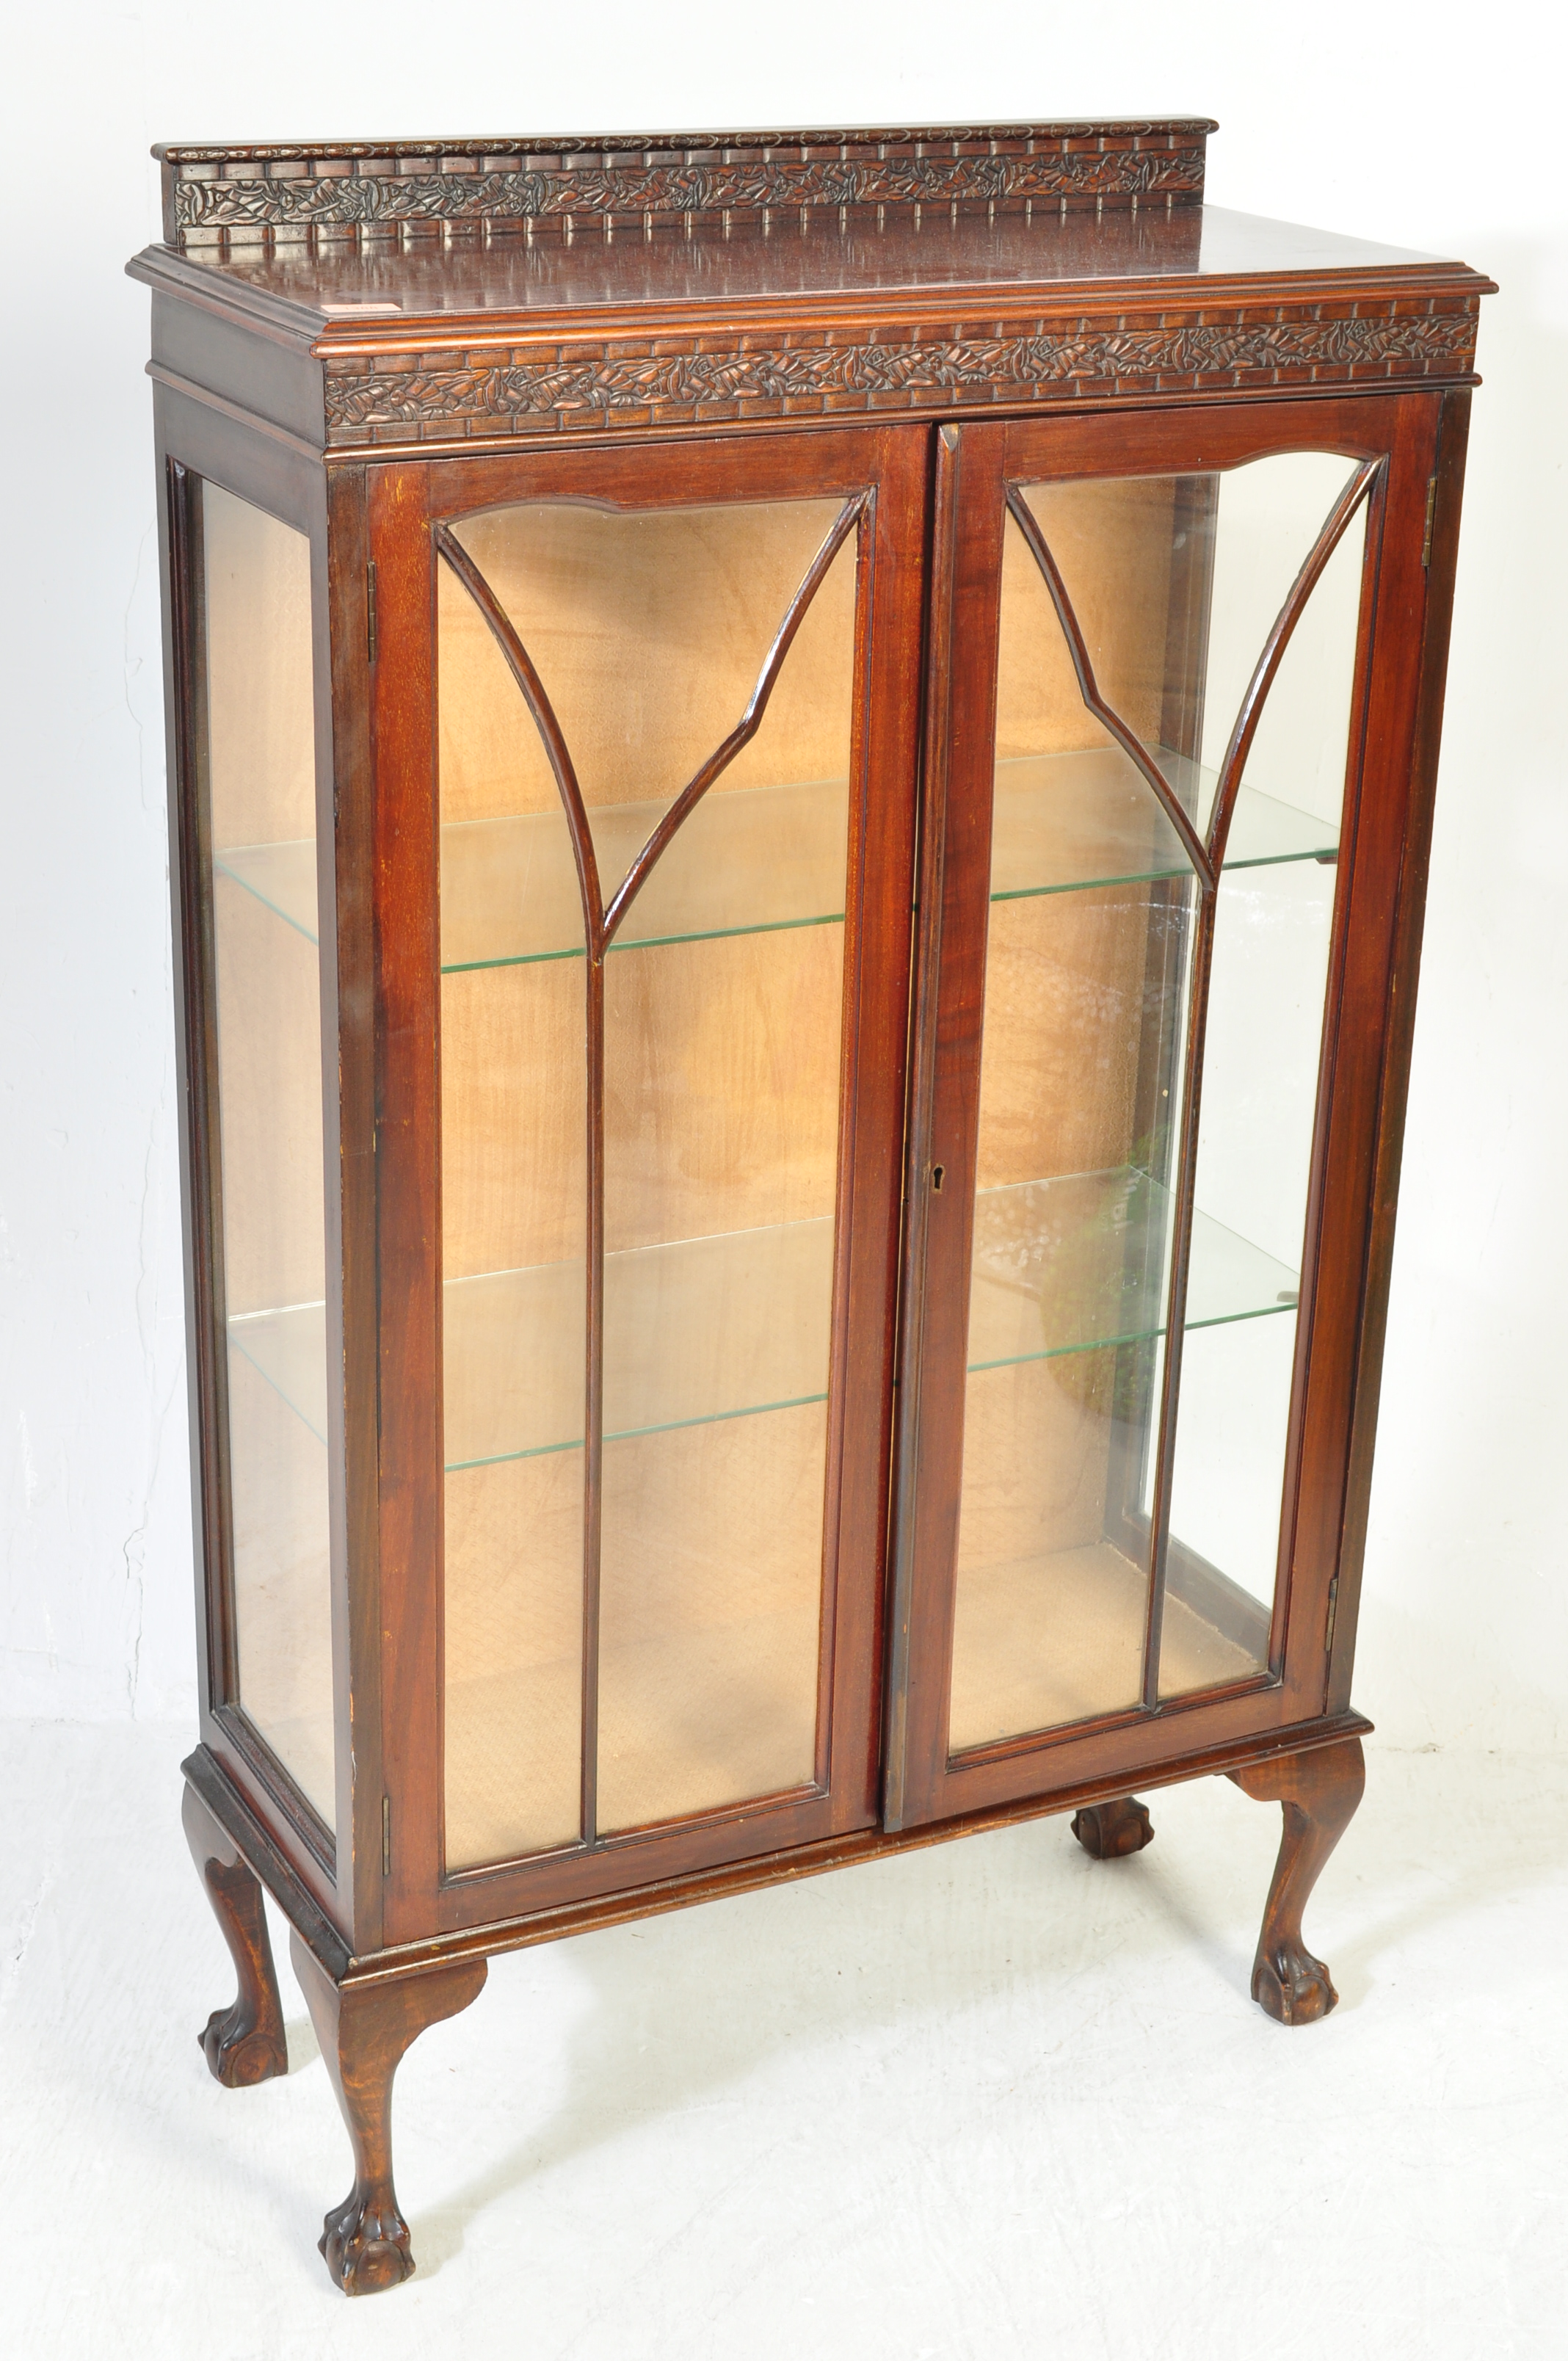 1930'S QUEEN ANNE REVIVAL MAHOGANY CHINA DISPLAY CABINET - Image 2 of 6